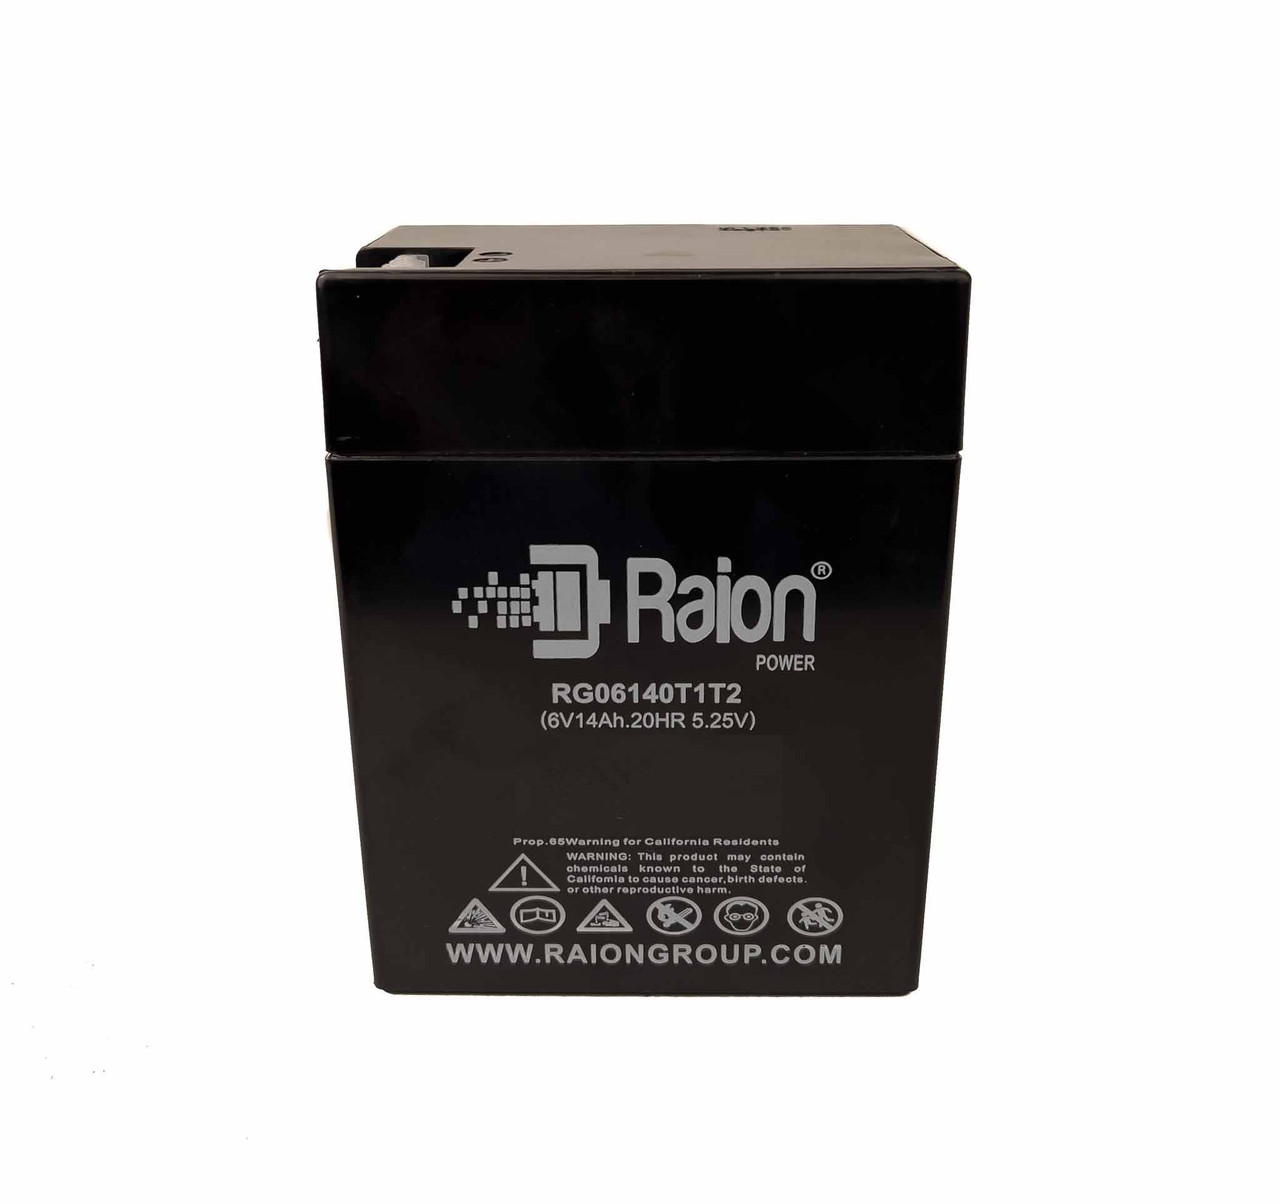 Raion Power RG06140T1T2 Non-Spillable Replacement Battery for Teledyne 2IQ6S20